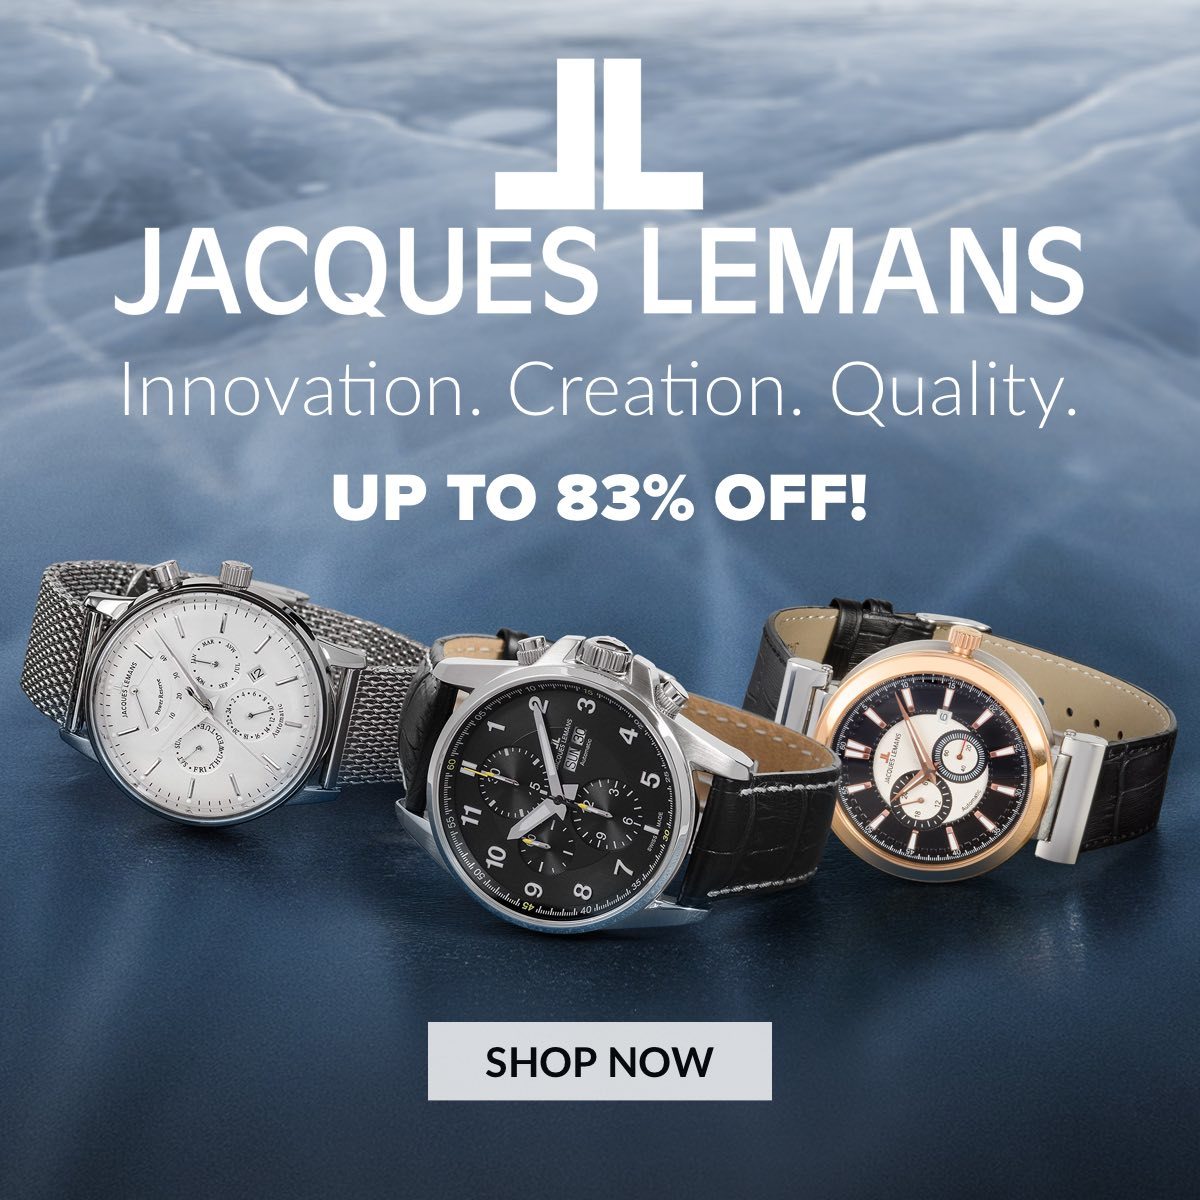 Jacques Lemans Innovation. Creation. Quality. Up to 83% off!